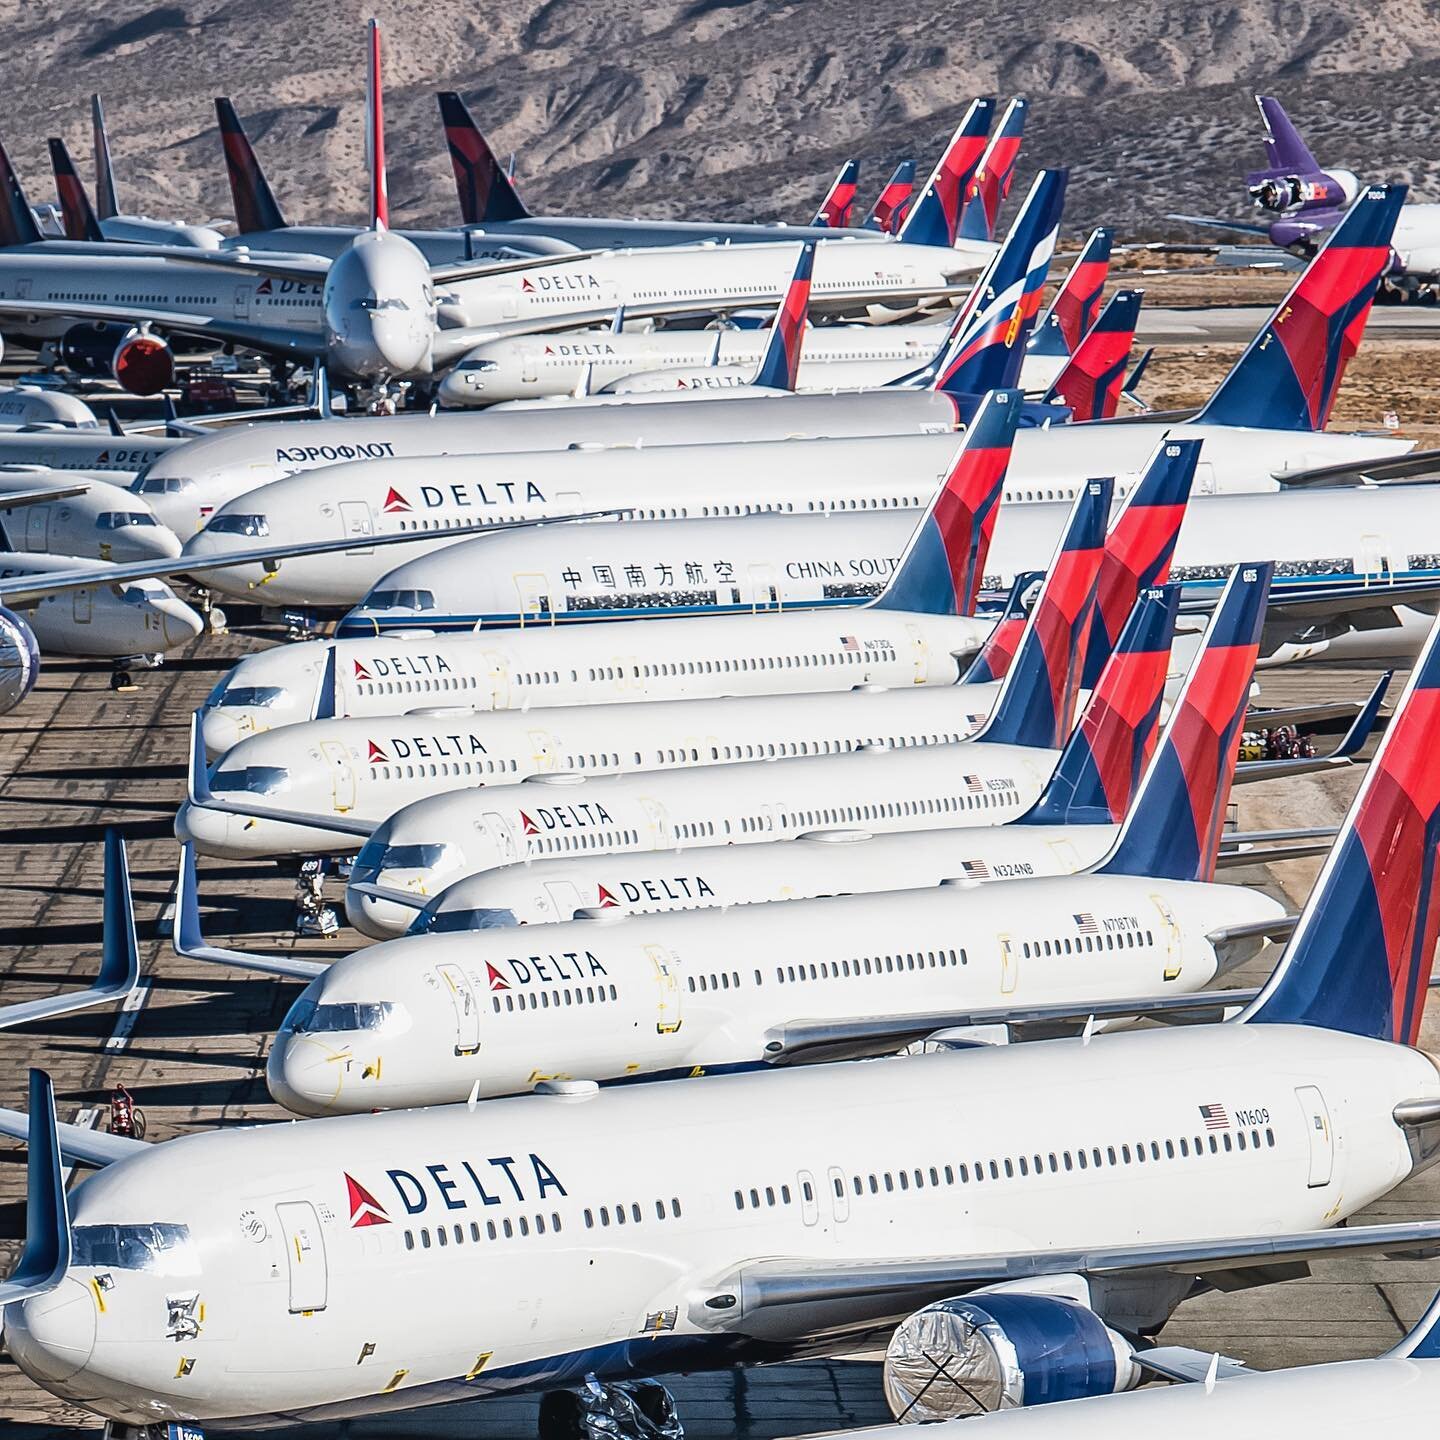 Lineups that are slowly fading away into history. #deltaairlines #boeing #boeinglover #boeing757 #757 #instagramaviation #aviationlover #aviationphotography #aerialphotography #nikon #nikonphotography #d850 #victorville #vcv #victorvilleairport #avge